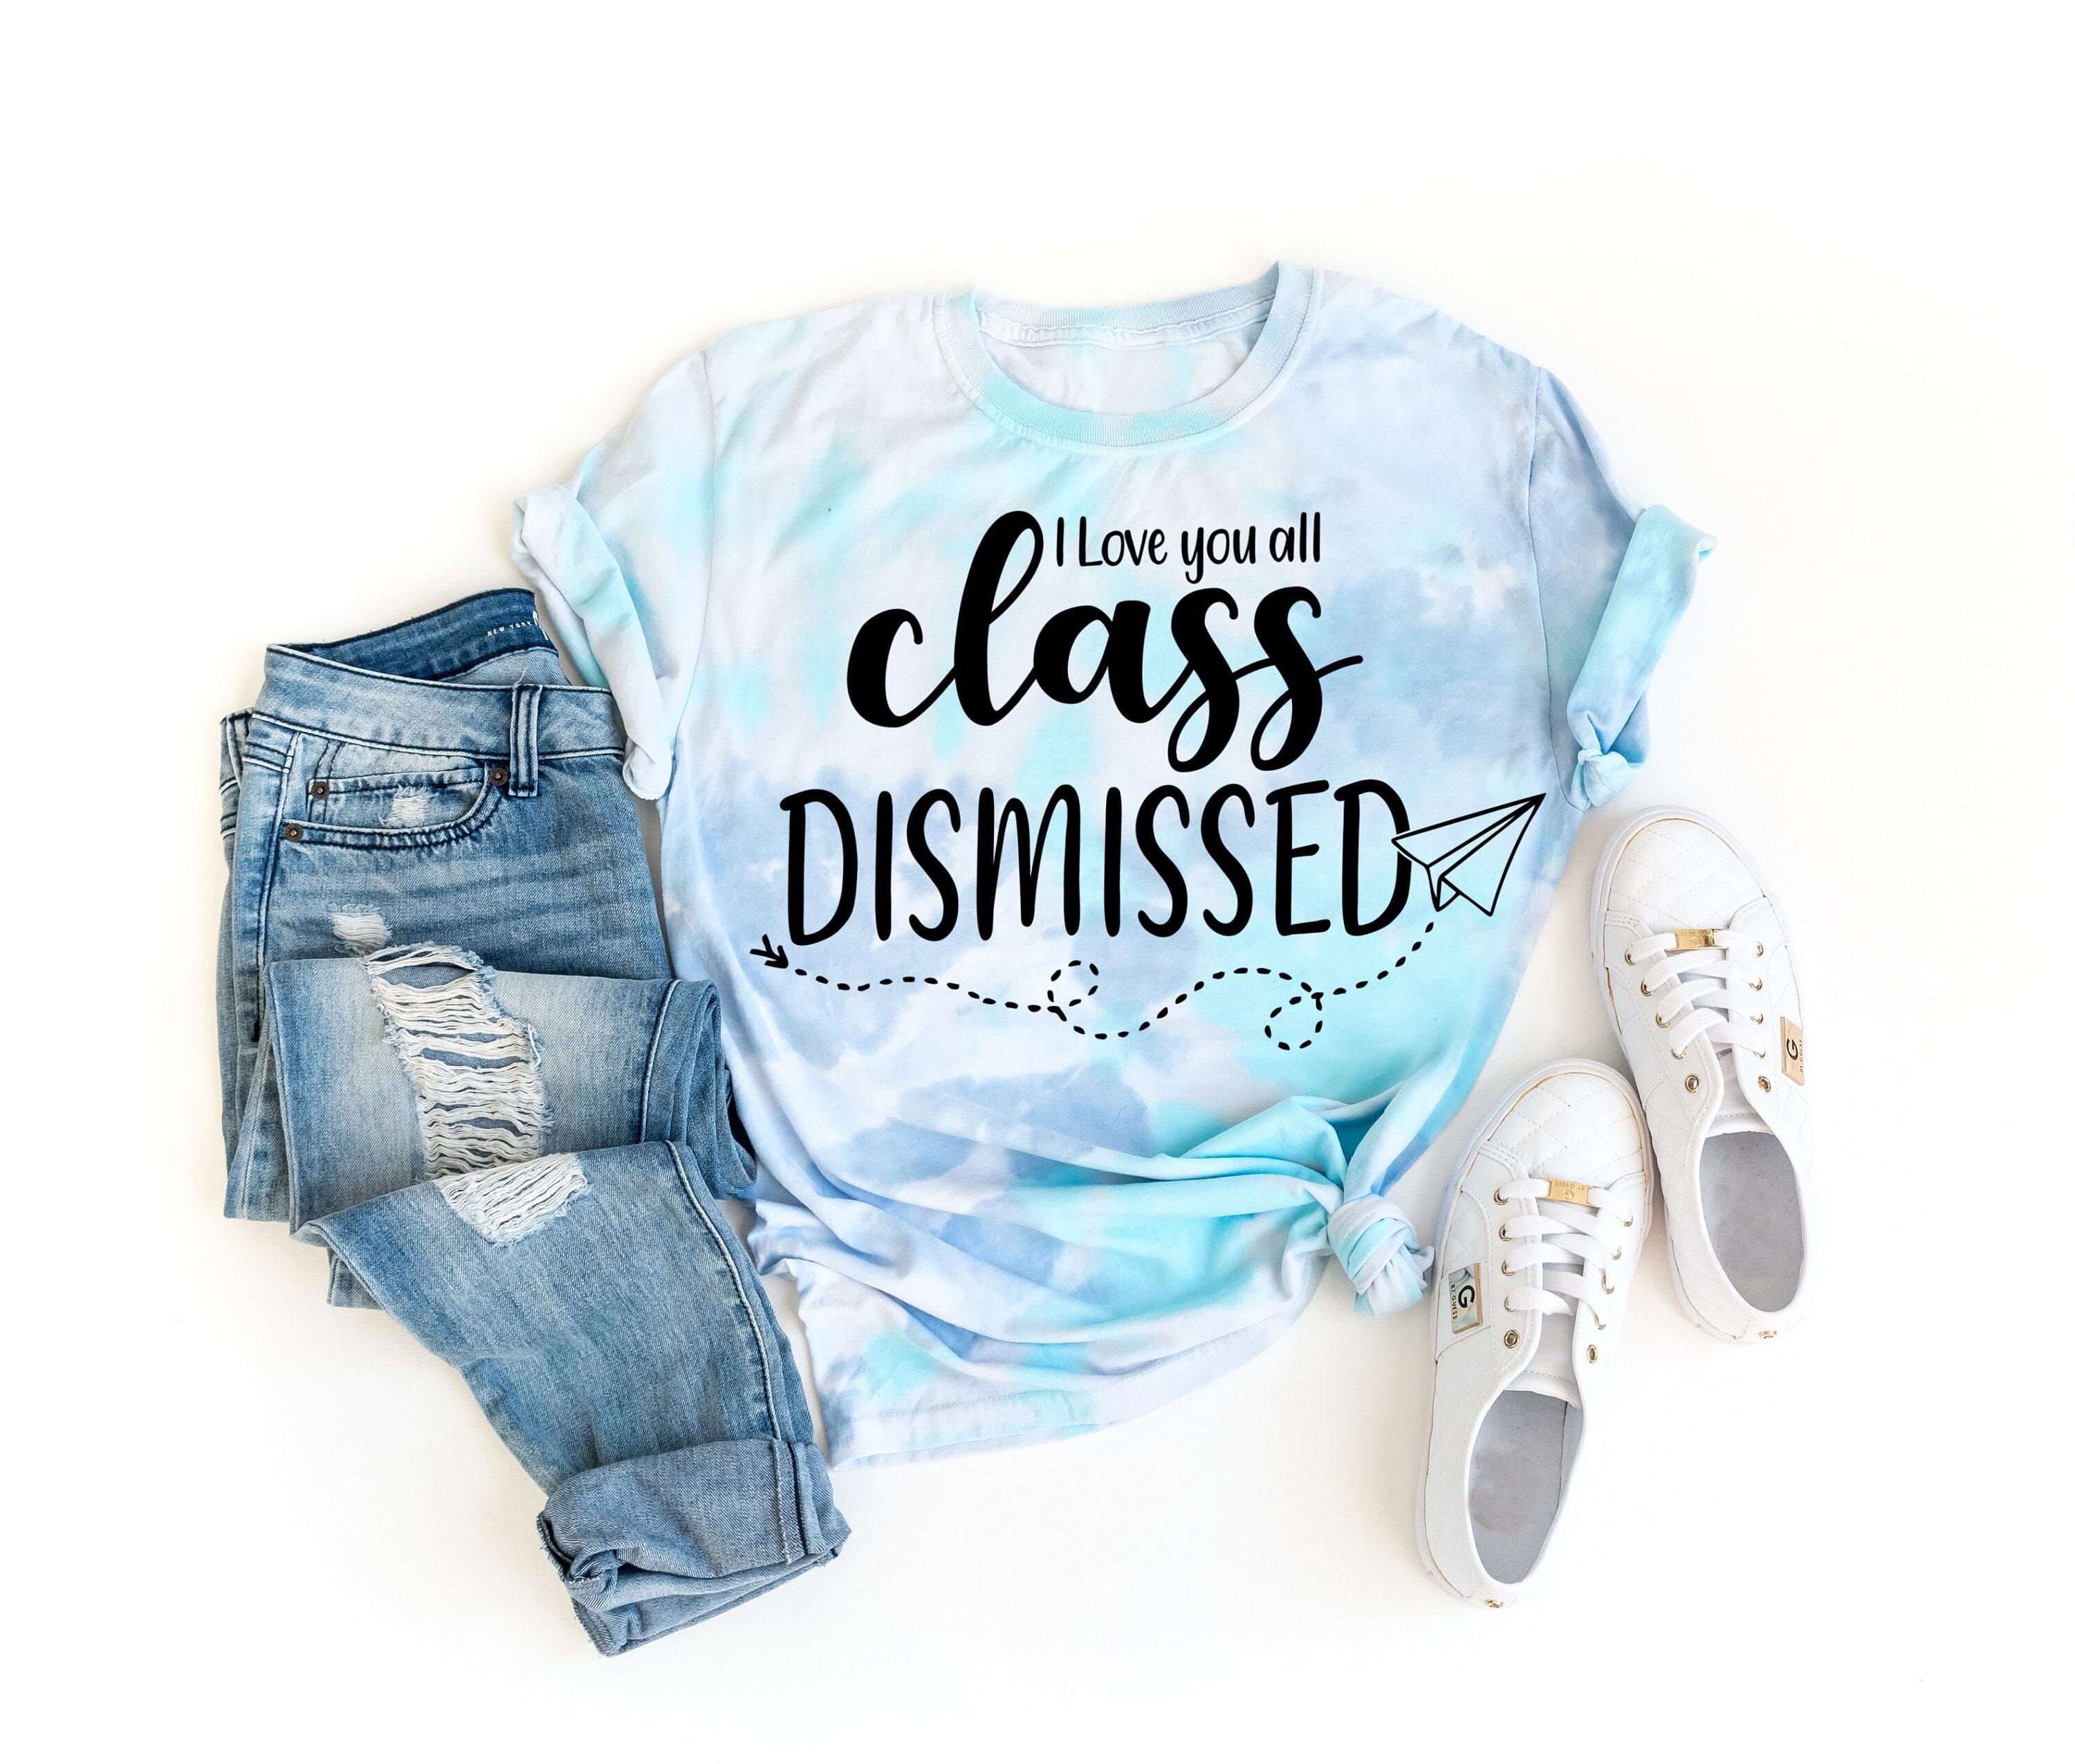 Class Dismissed Teacher Shirts Last Day of School Shirt Teacher Shirt End of Year Teacher Gift Thank you Gift Funny Teacher Tshirt